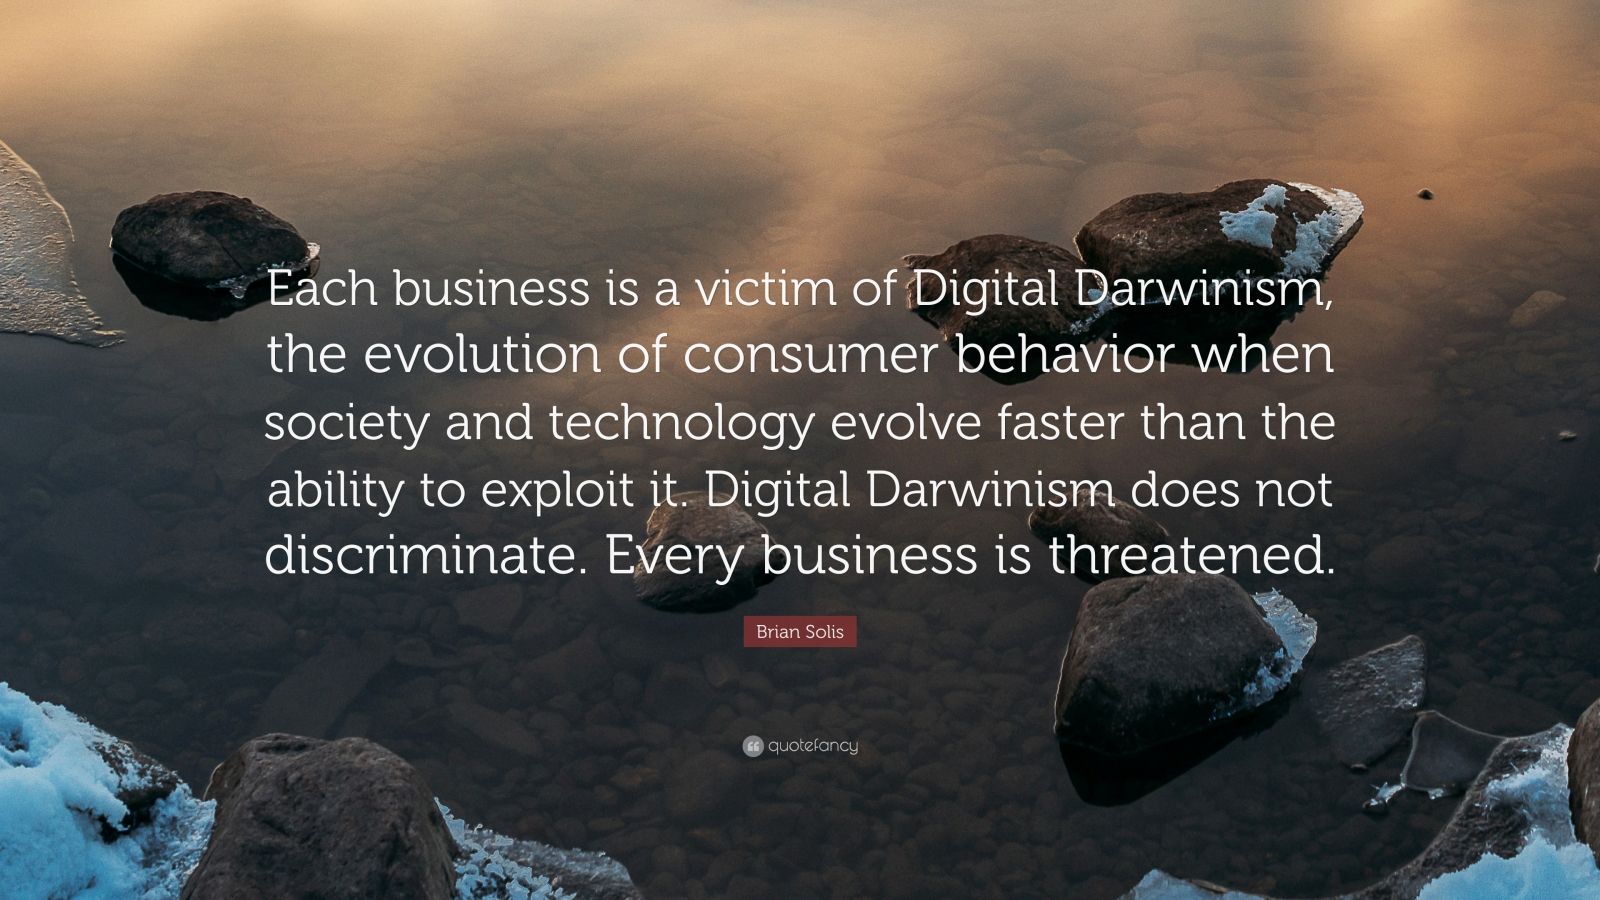 Brian Solis Quote: “Each business is a victim of Digital Darwinism, the